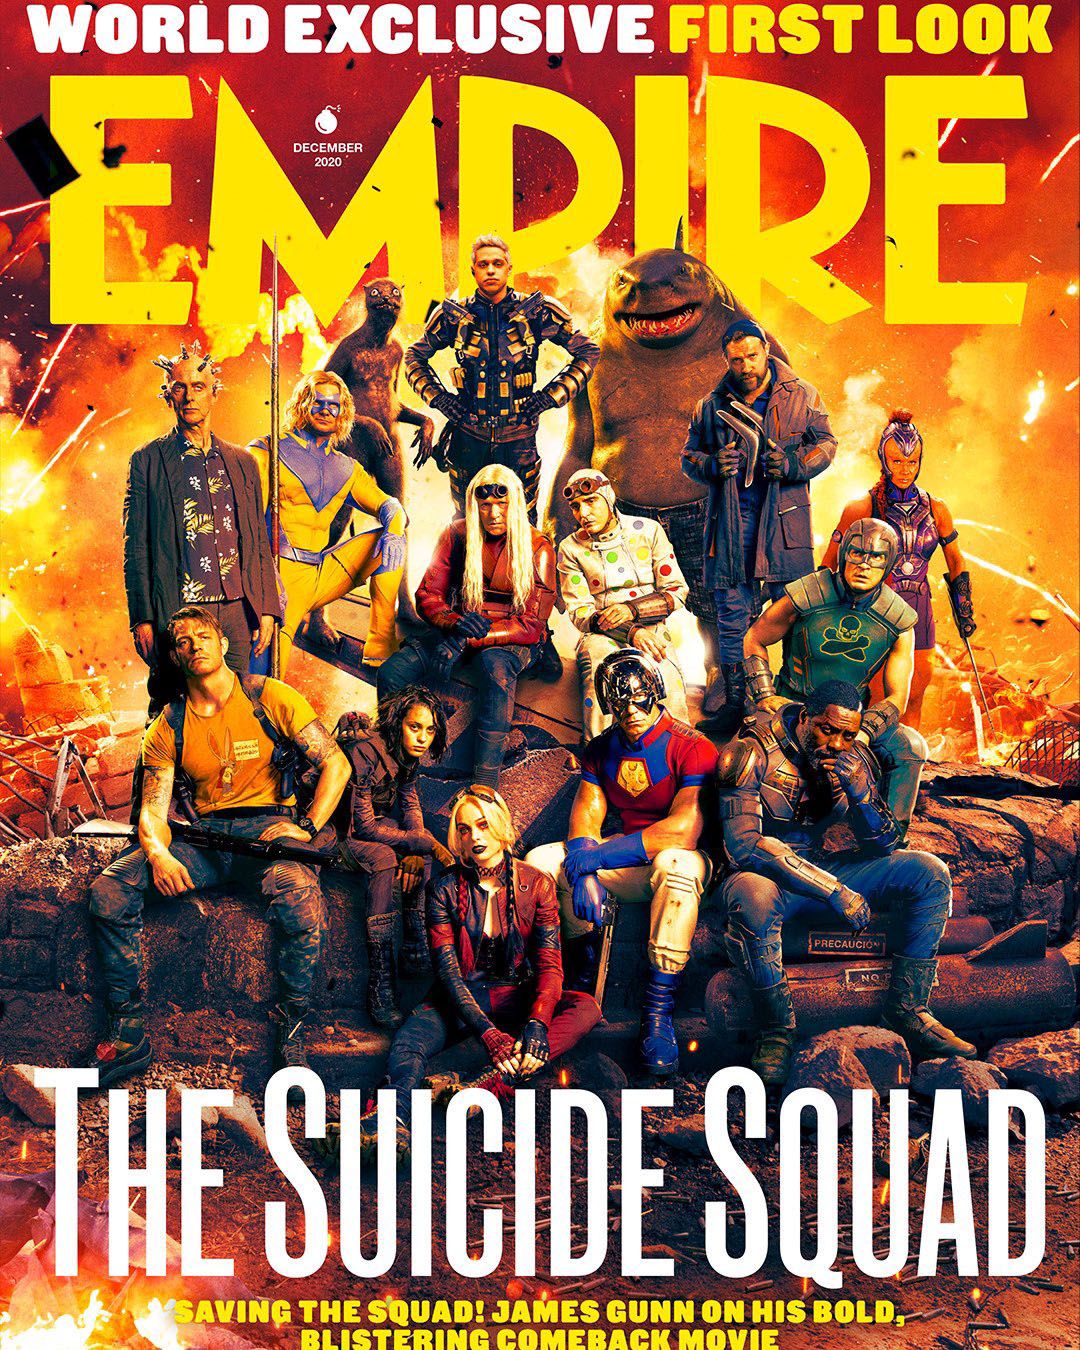 Empire shares two new covers for The Suicide Squad